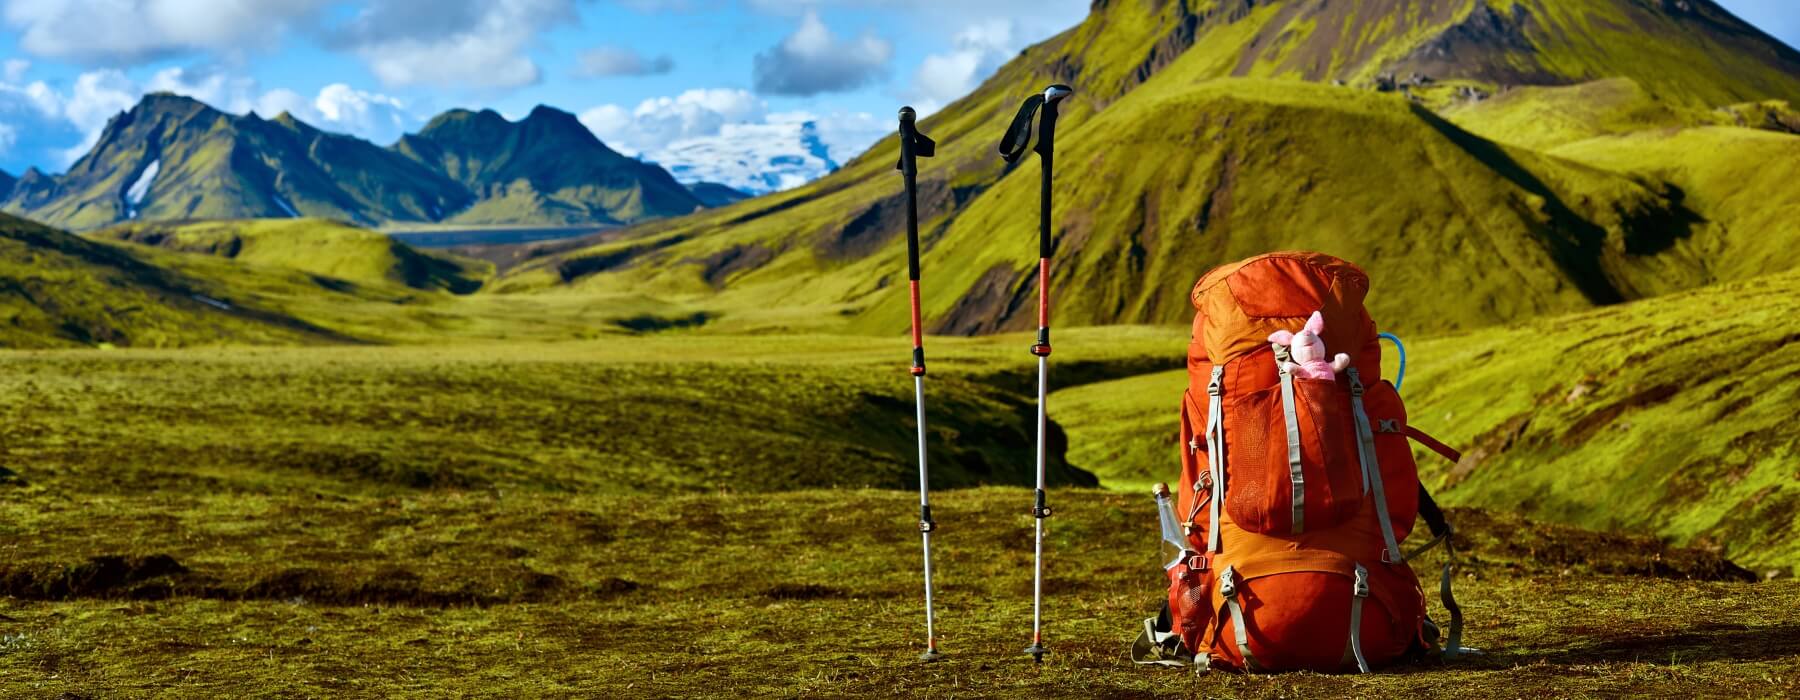 THE BEST TREKKING POLES TO EXPLORE THE ANDES